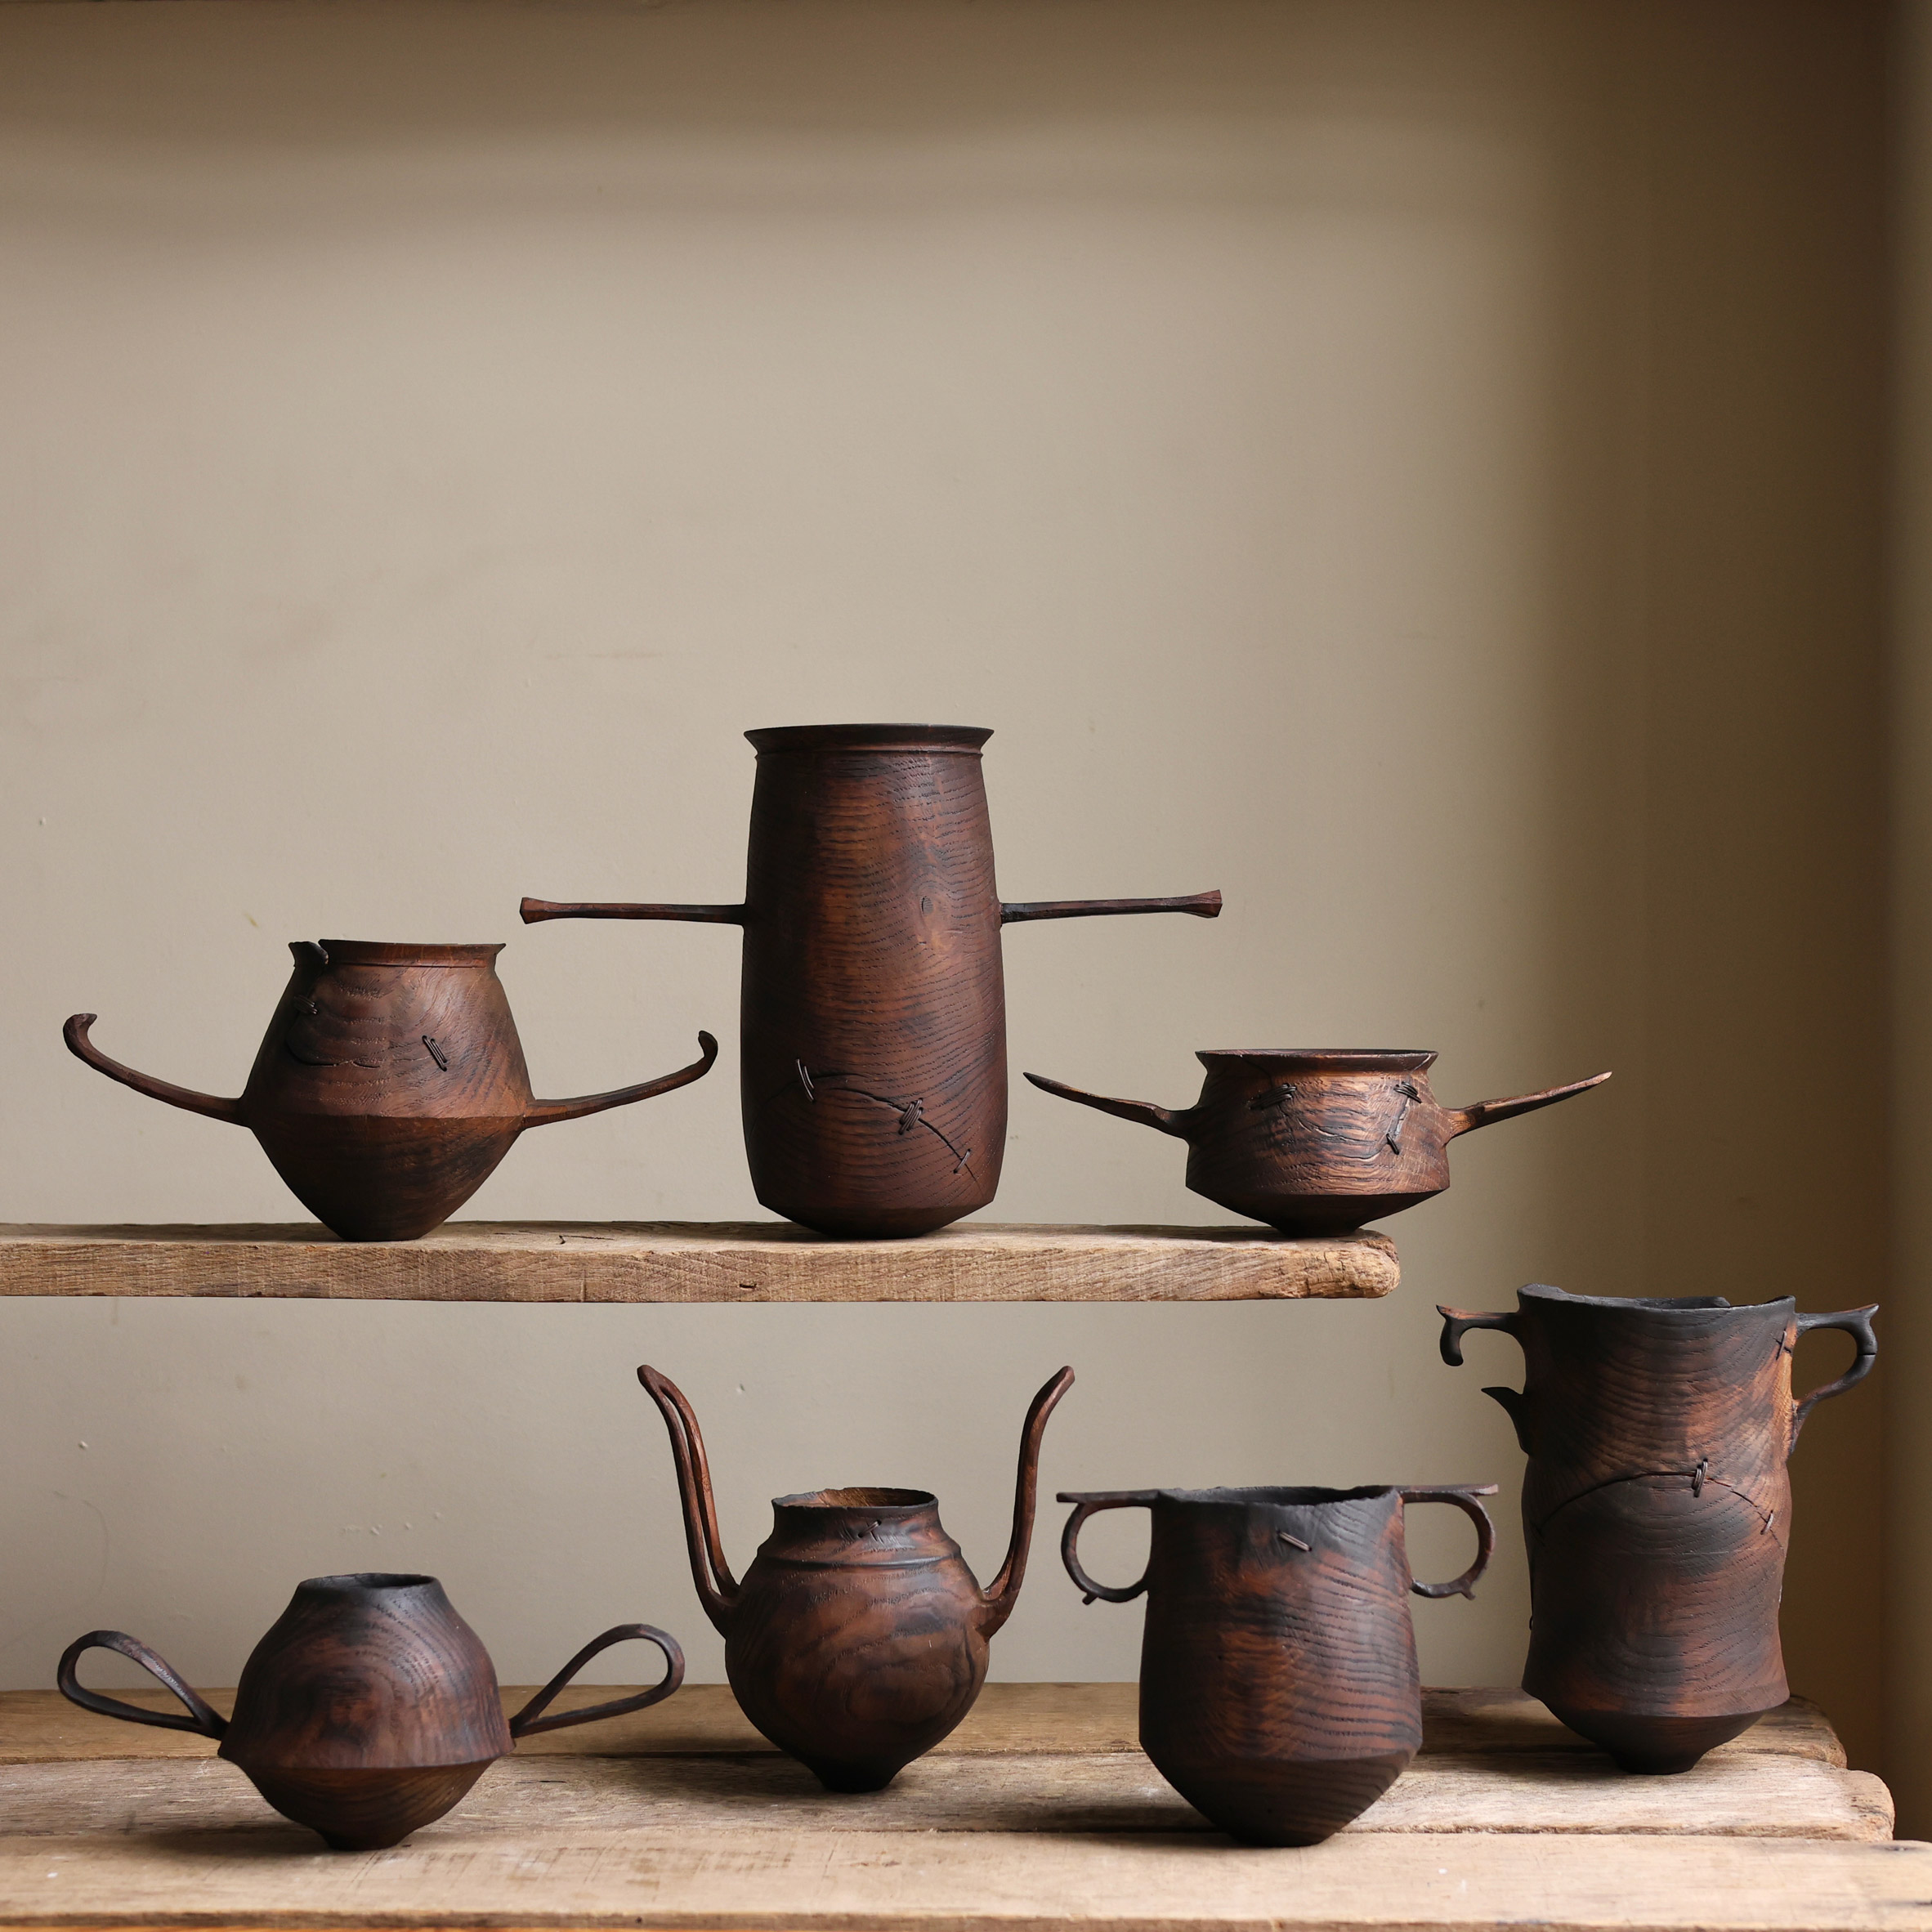 Series of seven small wooden vessels